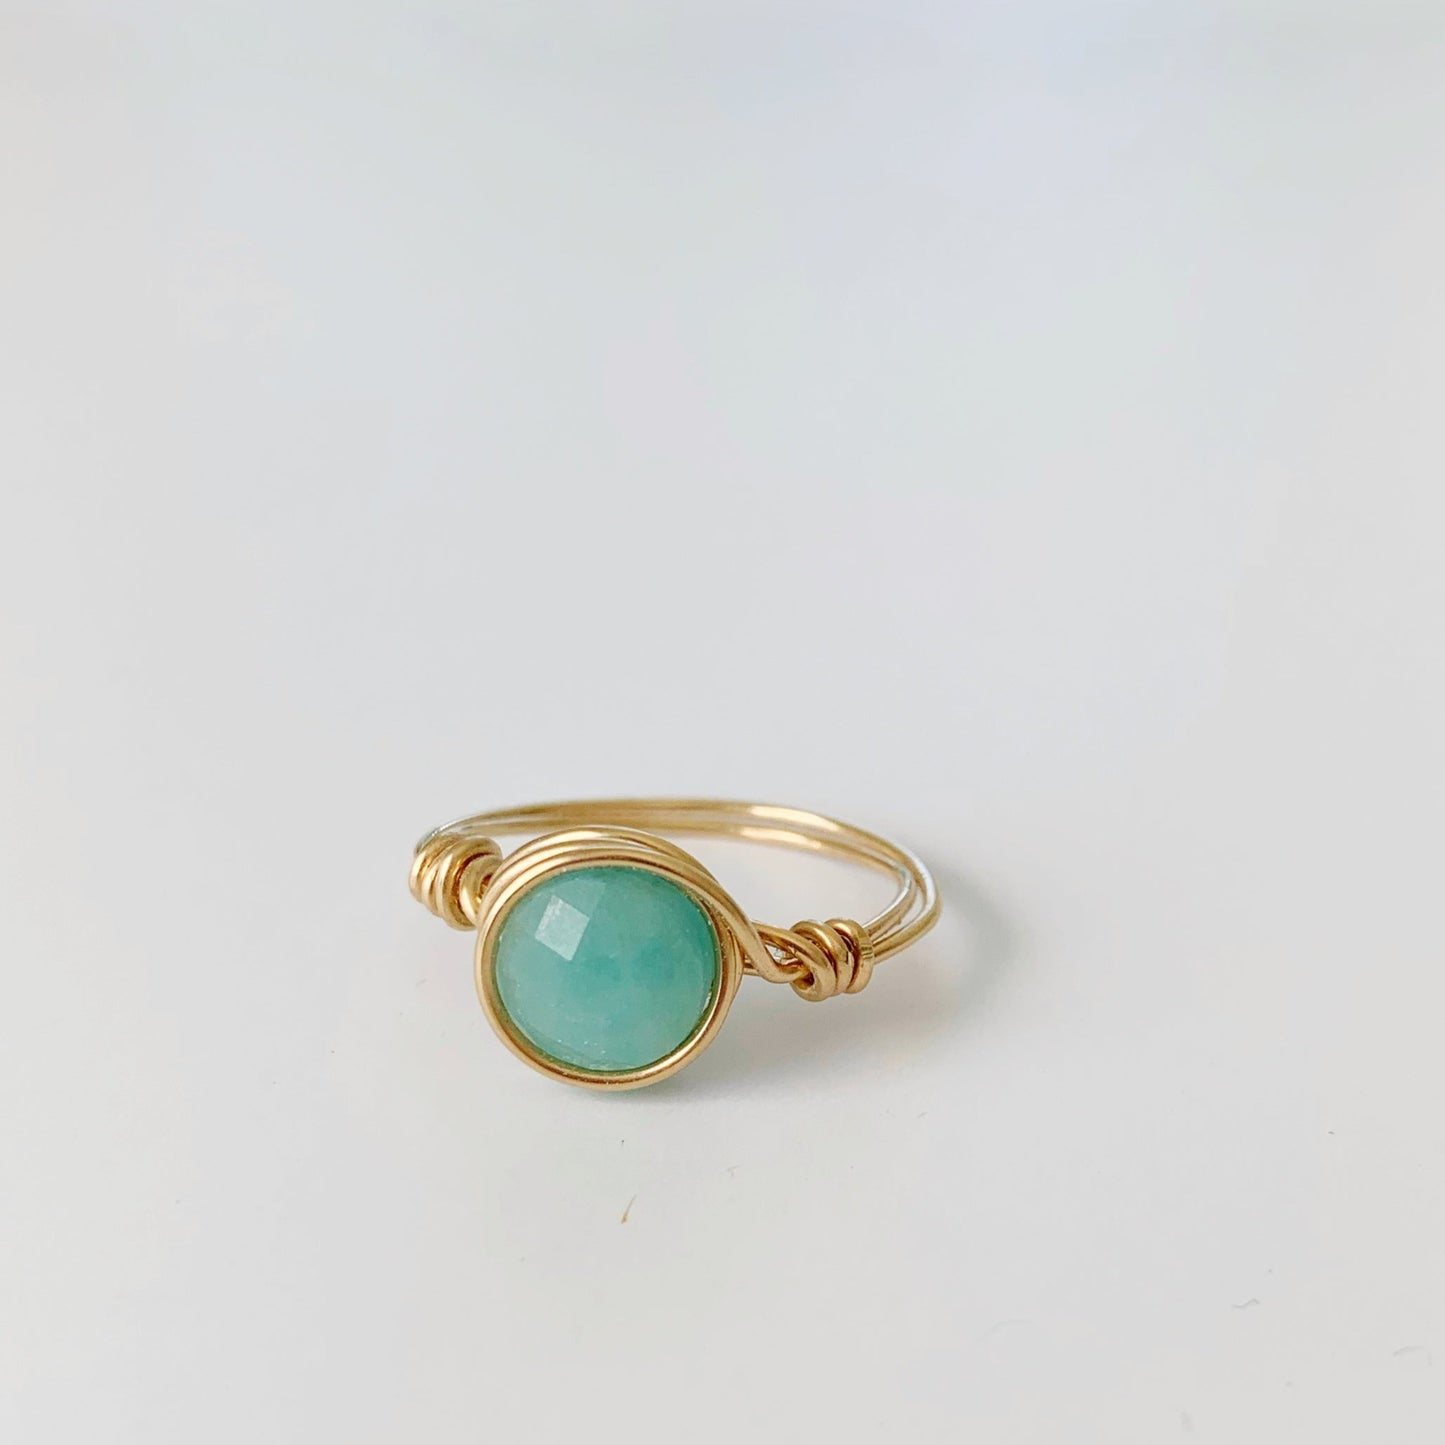 Mermaids and Madeleines Captiva Wire Wrapped ring in 14k gold filled metal with an amazonite gem. This ring is pictured on a white surface